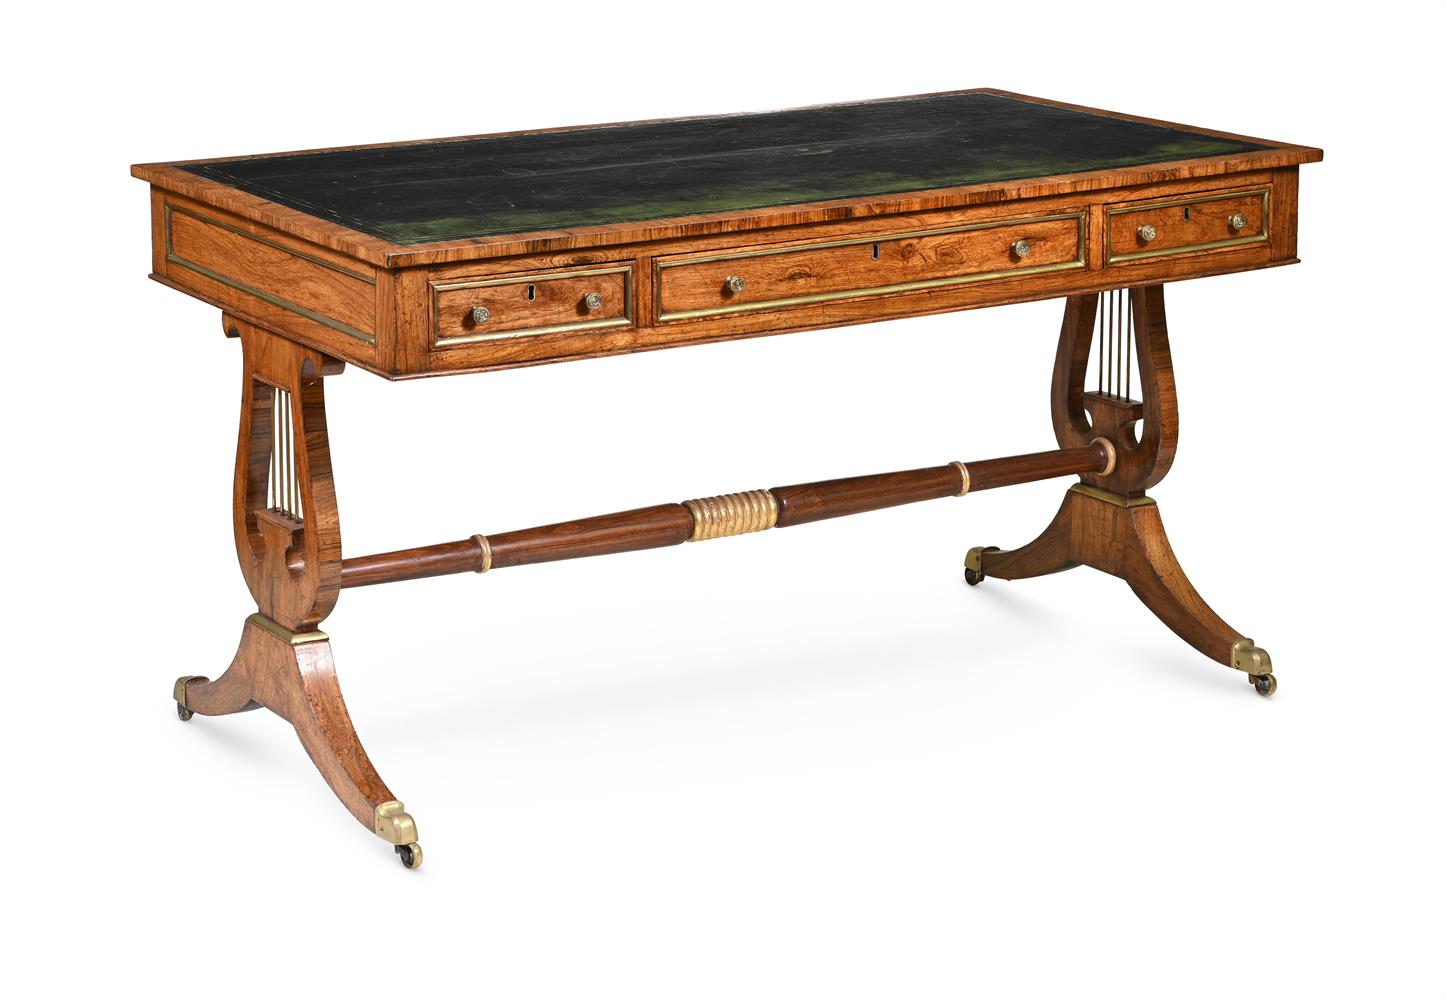 Y A REGENCY BRASS MOUNTED ROSEWOOD LIBRARY TABLE, EARLY 19TH CENTURY